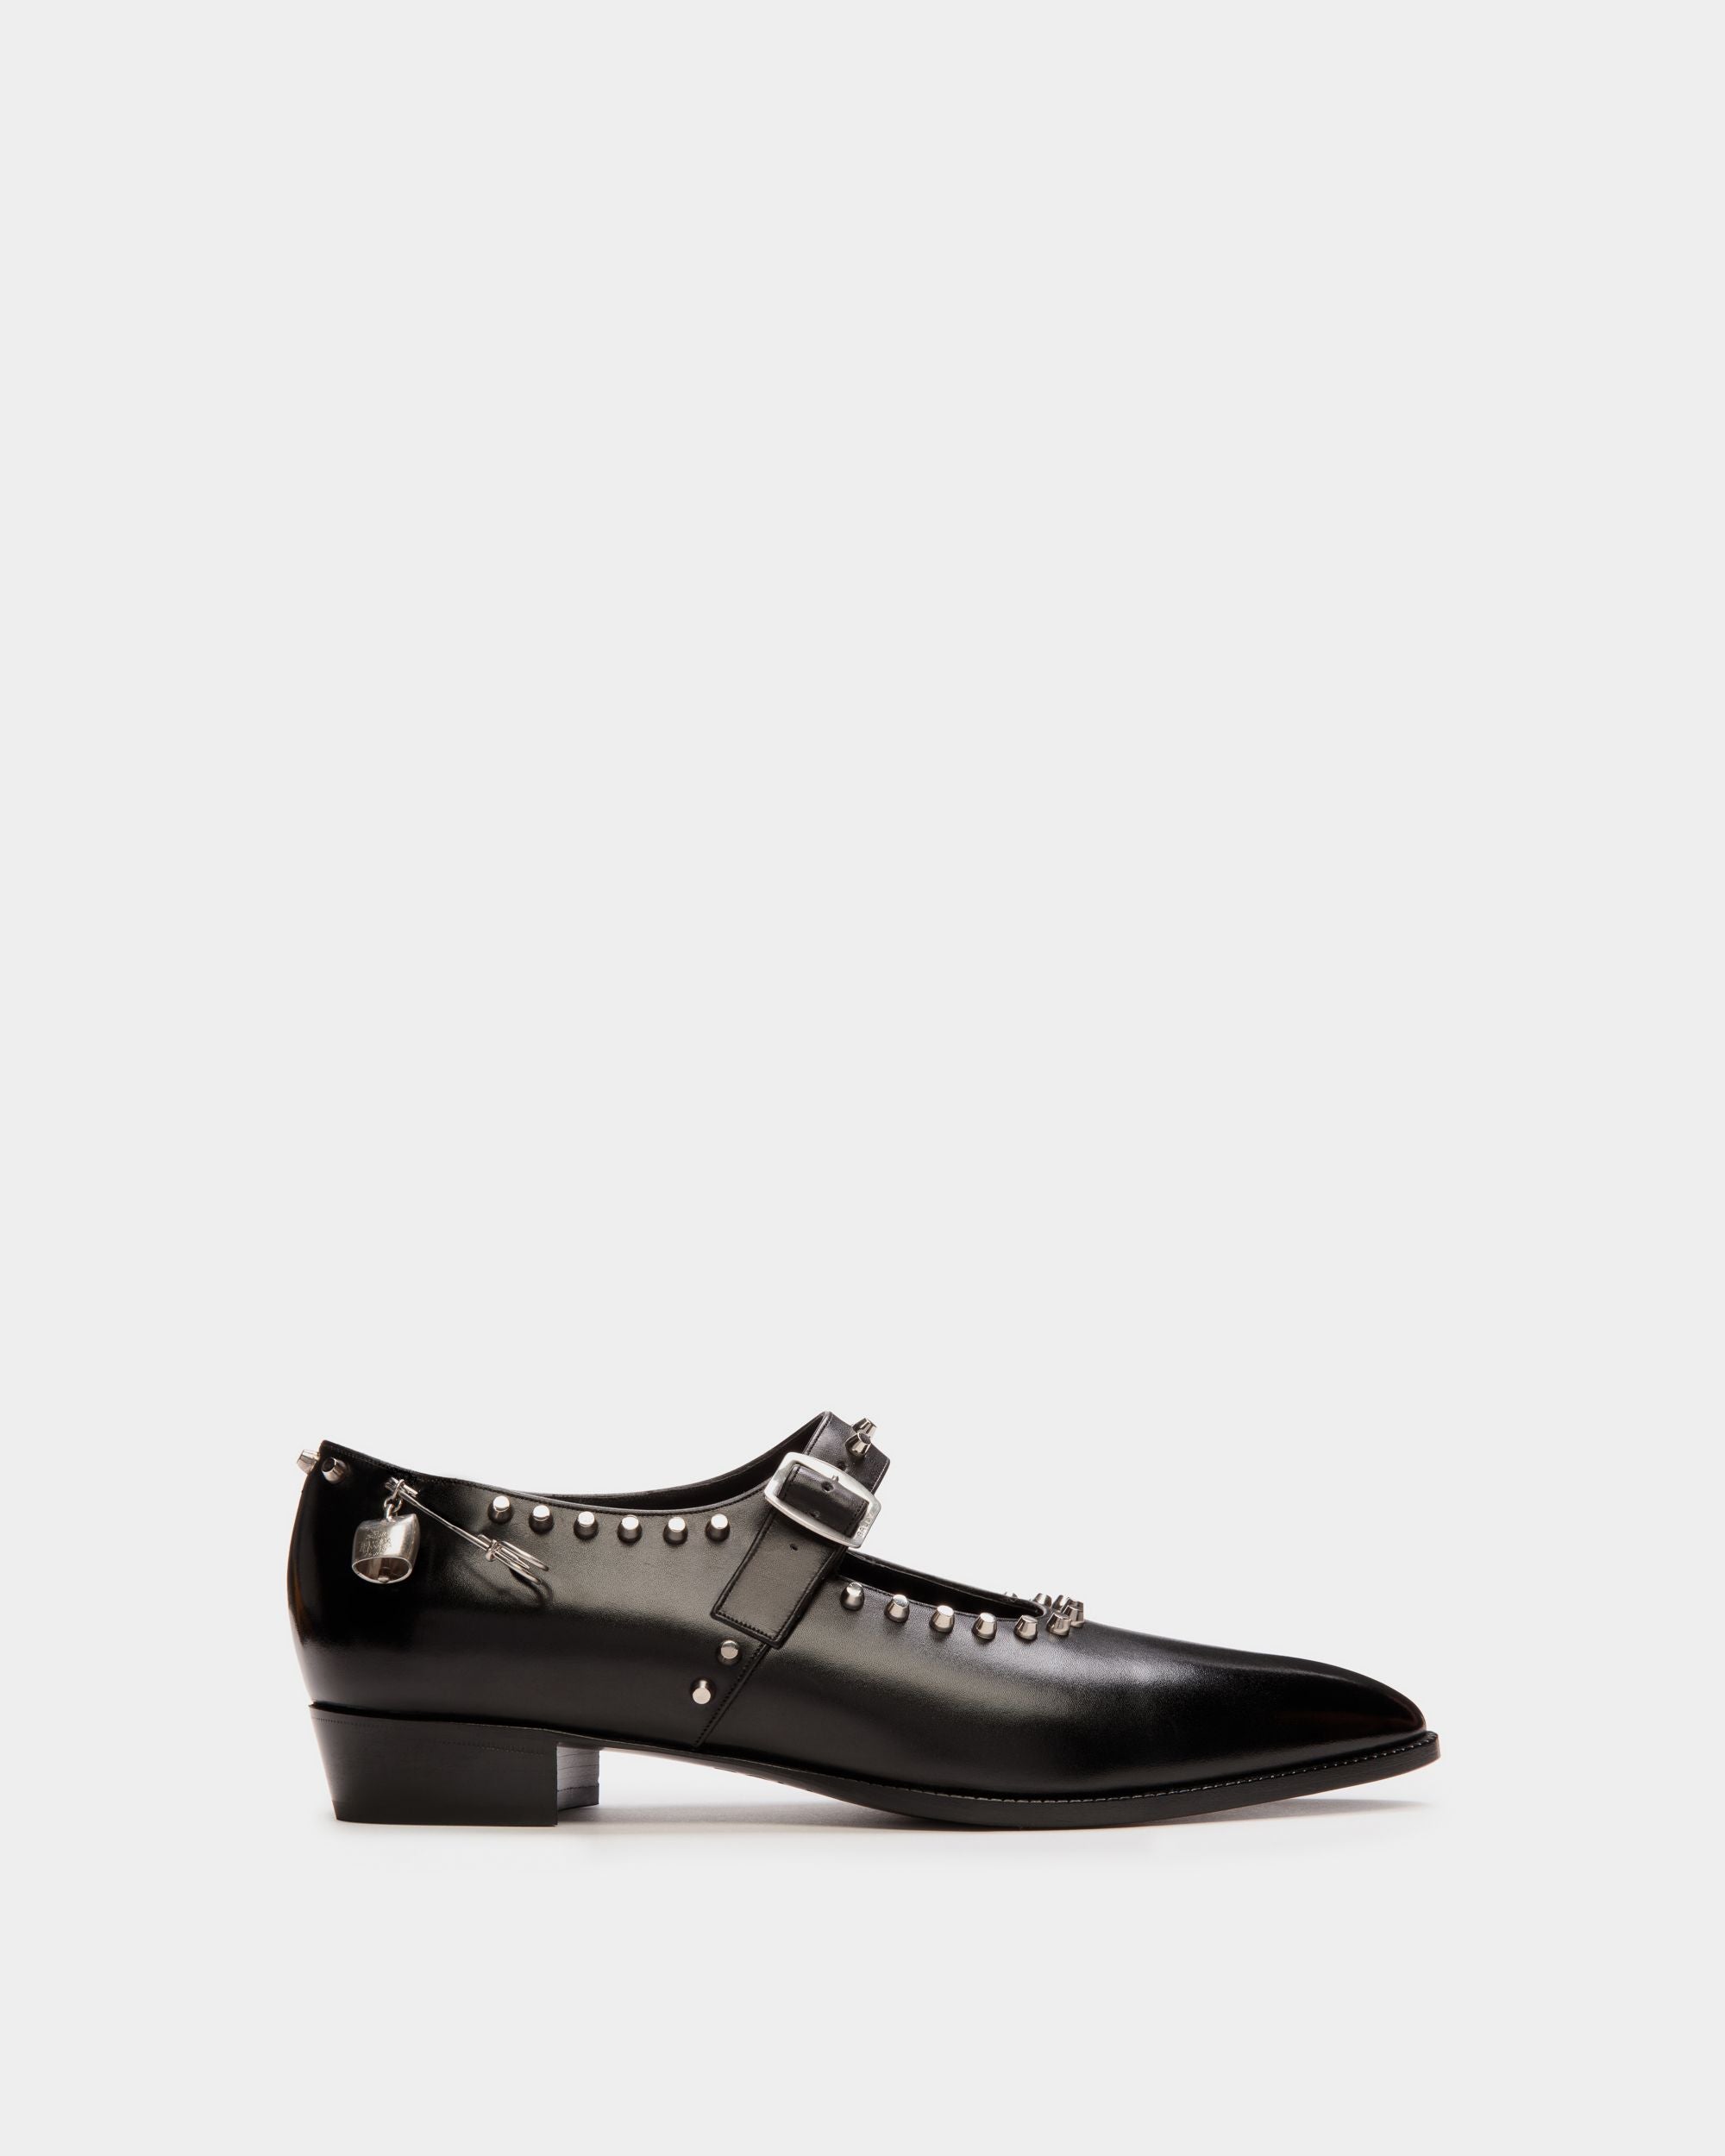 Women's Glendale Mary-Jane in Black Leather with Studs | Bally | Still Life Side